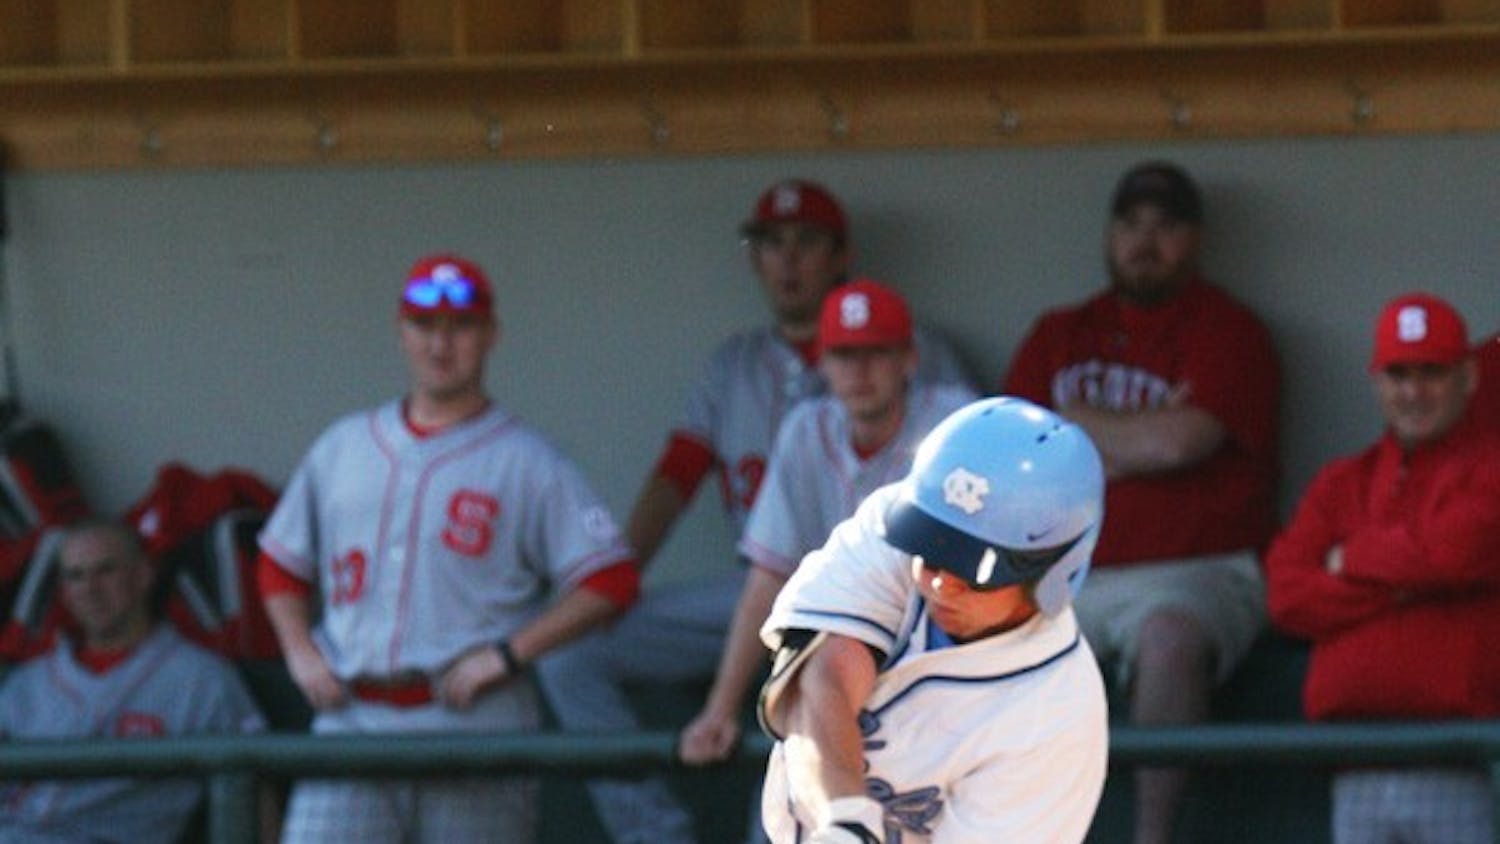 Mike Cavasinni took leadoff duties this weekend for the Tar Heels, crossing the plate six times in three games. DTH/Mike Ehrlich